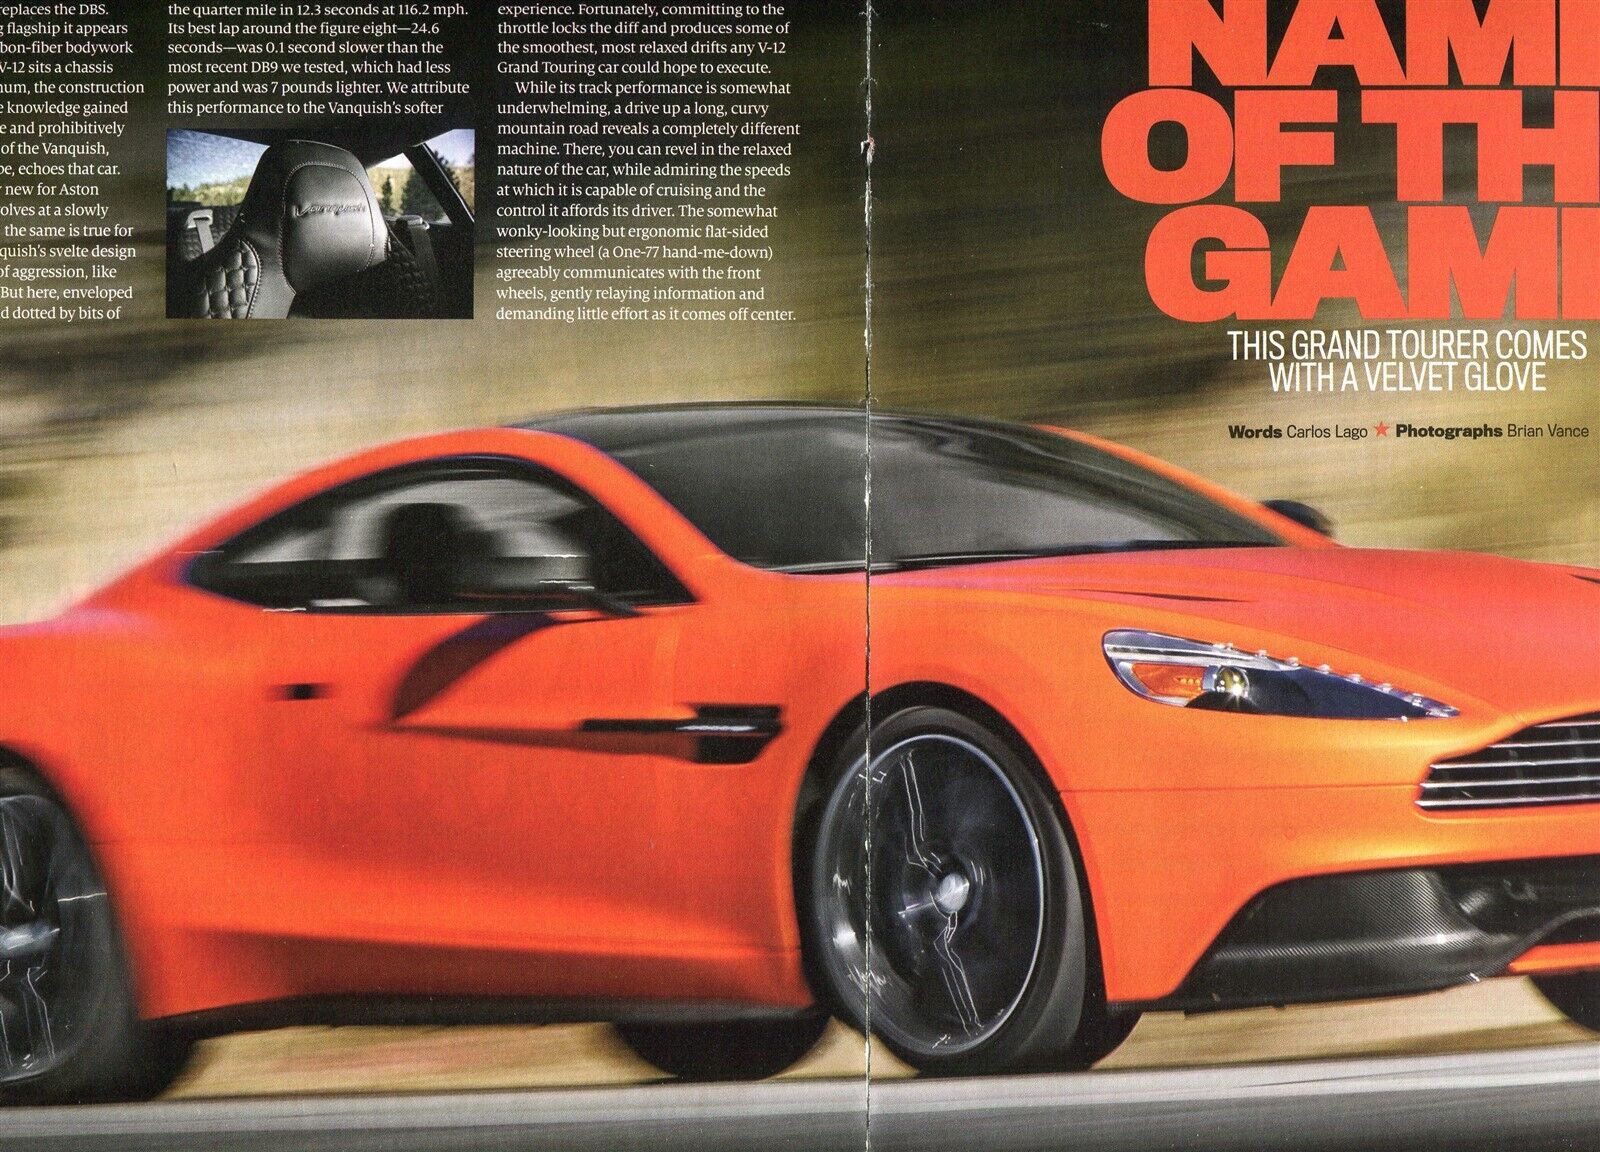 2014 ASTON MARTIN VANQUISH COUPE 4 PG ROAD TEST ARTICLE